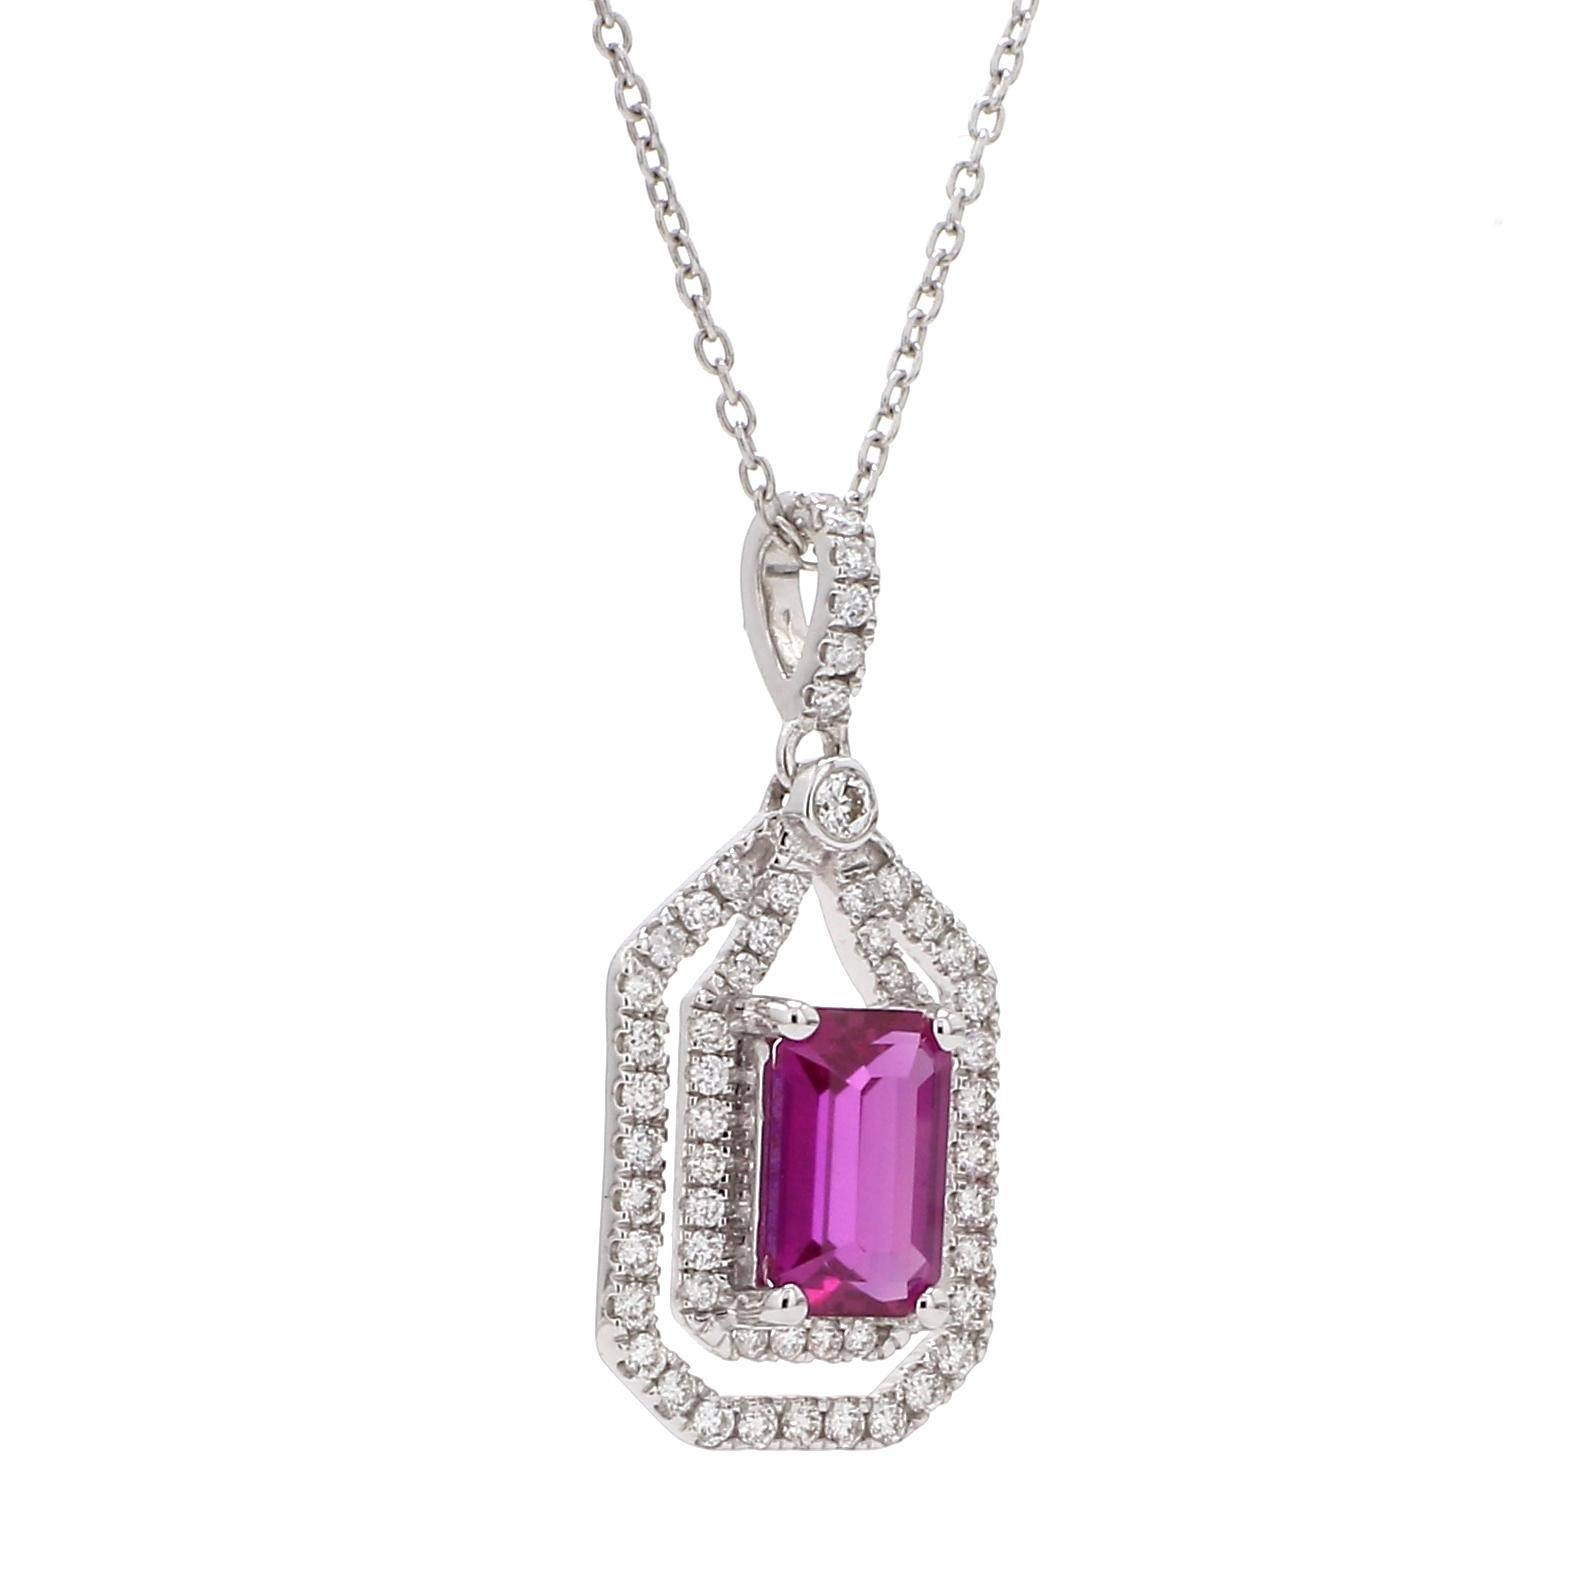 A Beautiful Handcrafted Necklace in 18 Karat White Gold with Natural & Ethically Mined Certified No Heat 1.64 Carat  Emerald Cut Pink Sapphire  in a  Halo Diamond Necklace with 18